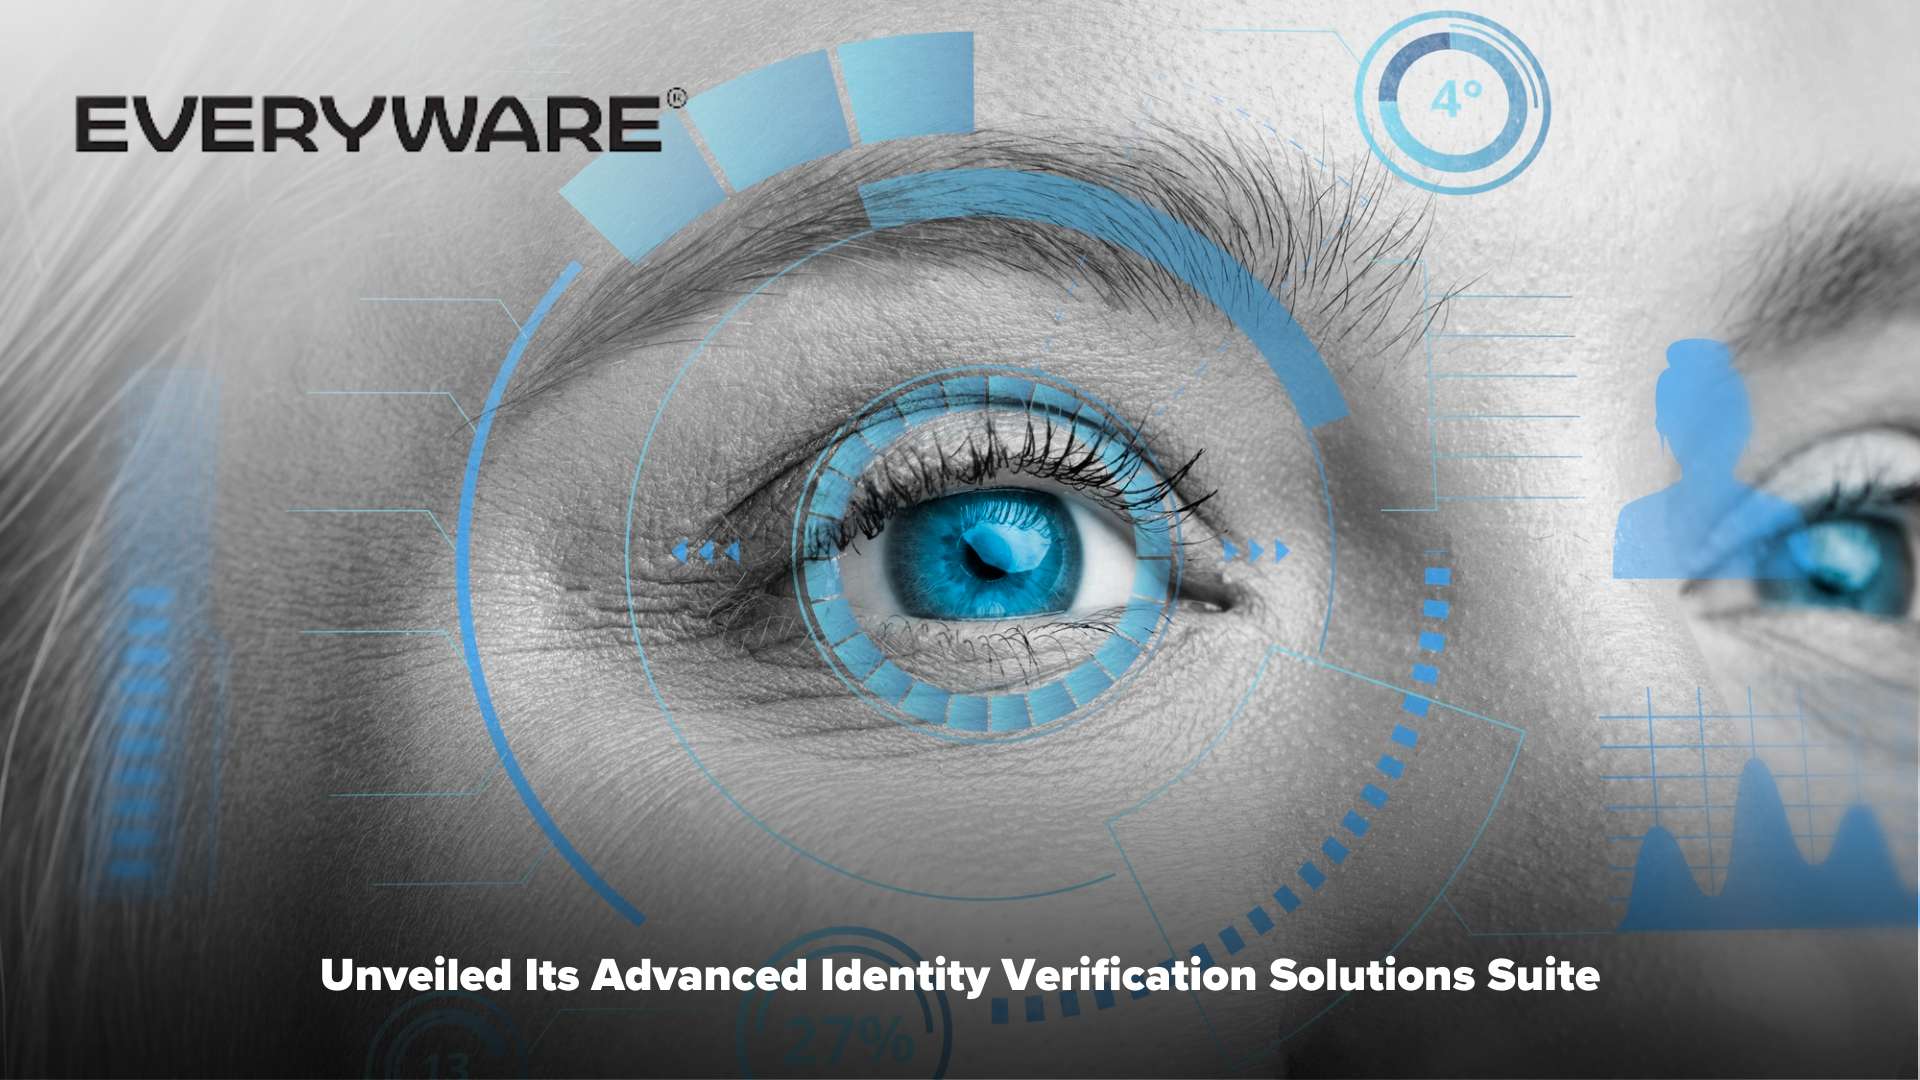 Everyware Launches Advanced Identity Verification Solutions to Combat Payments Fraud